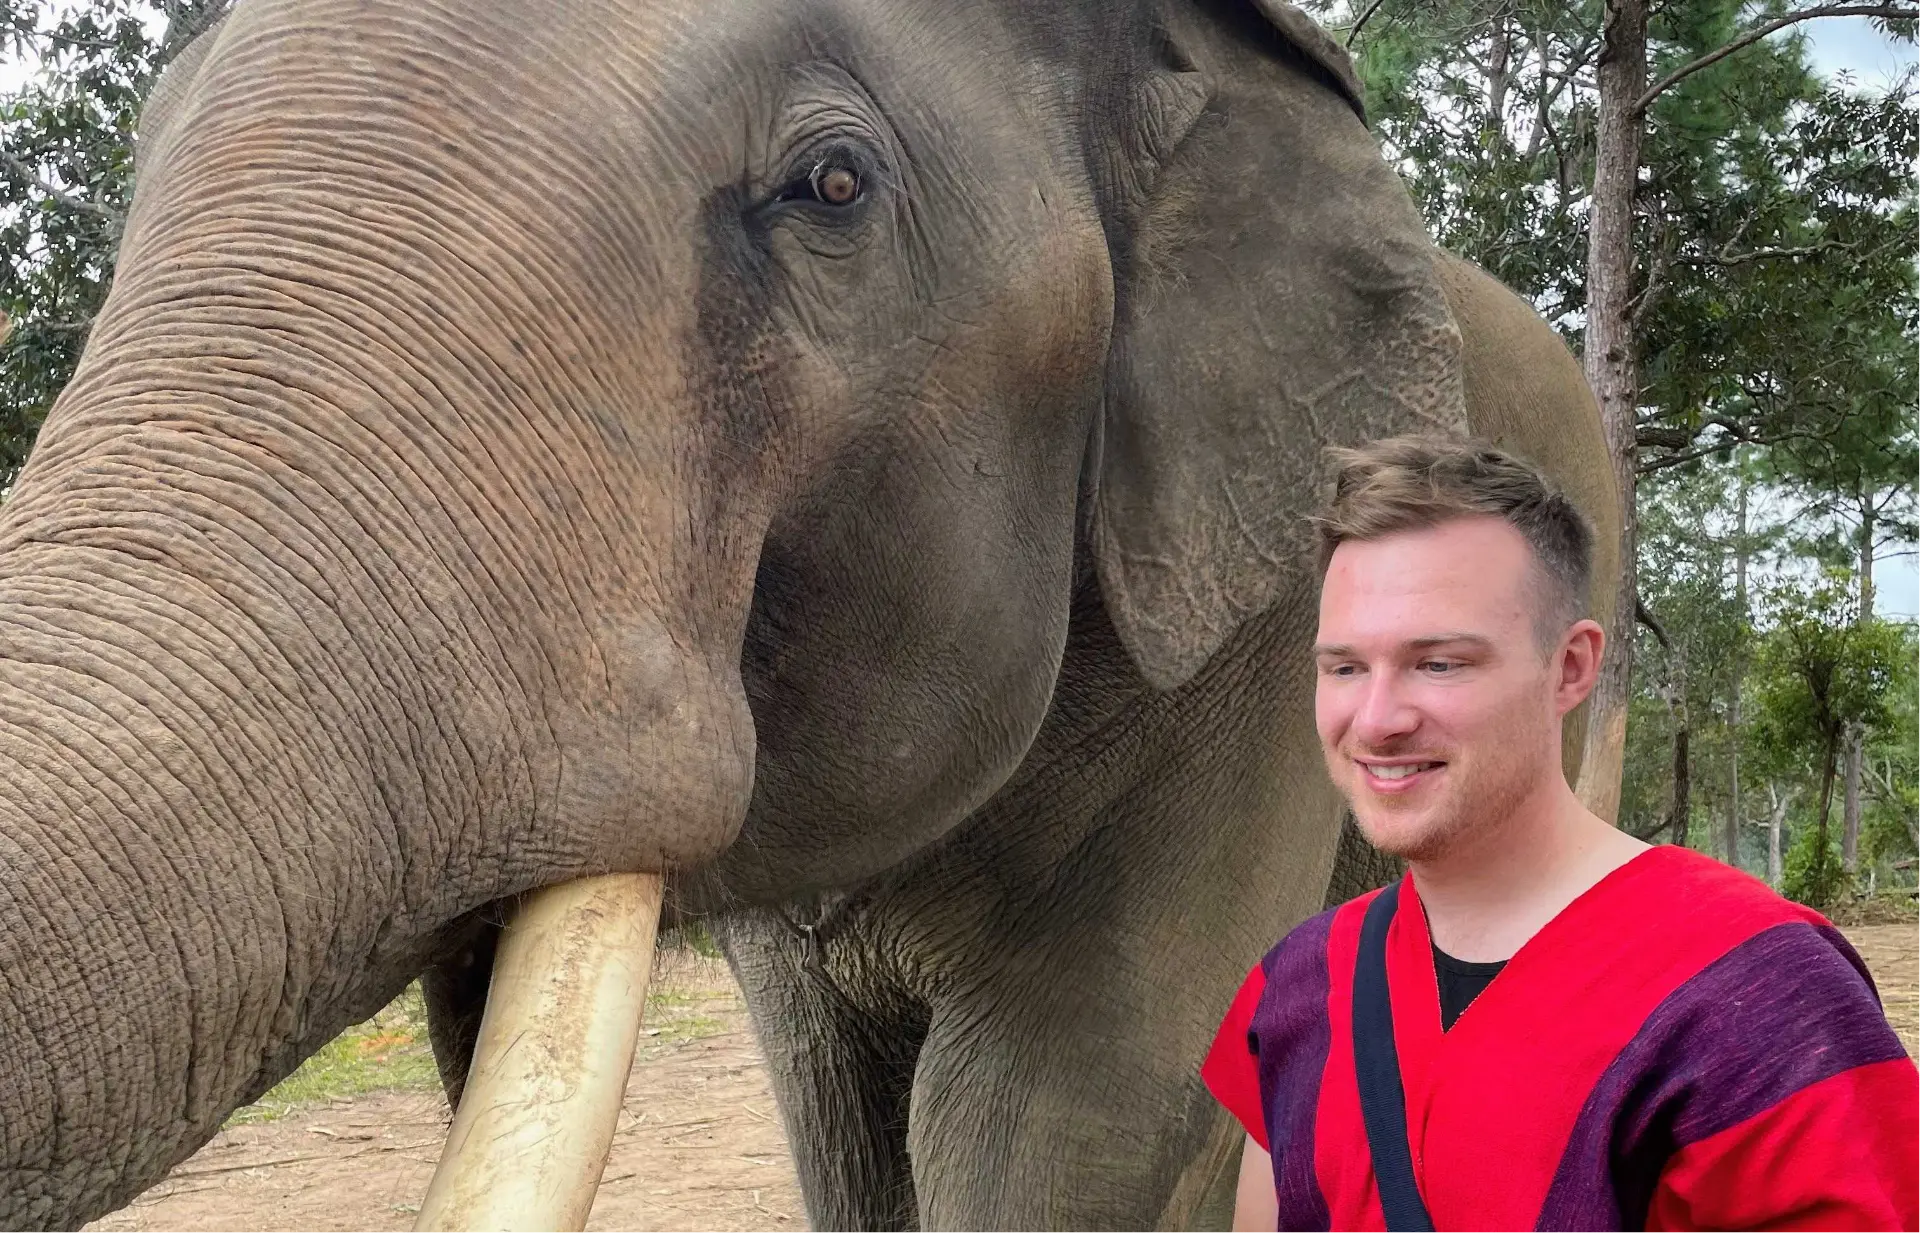 Dan stands next to an Elephant at Elephant Freedom Village in Chiang Mai, Thailand